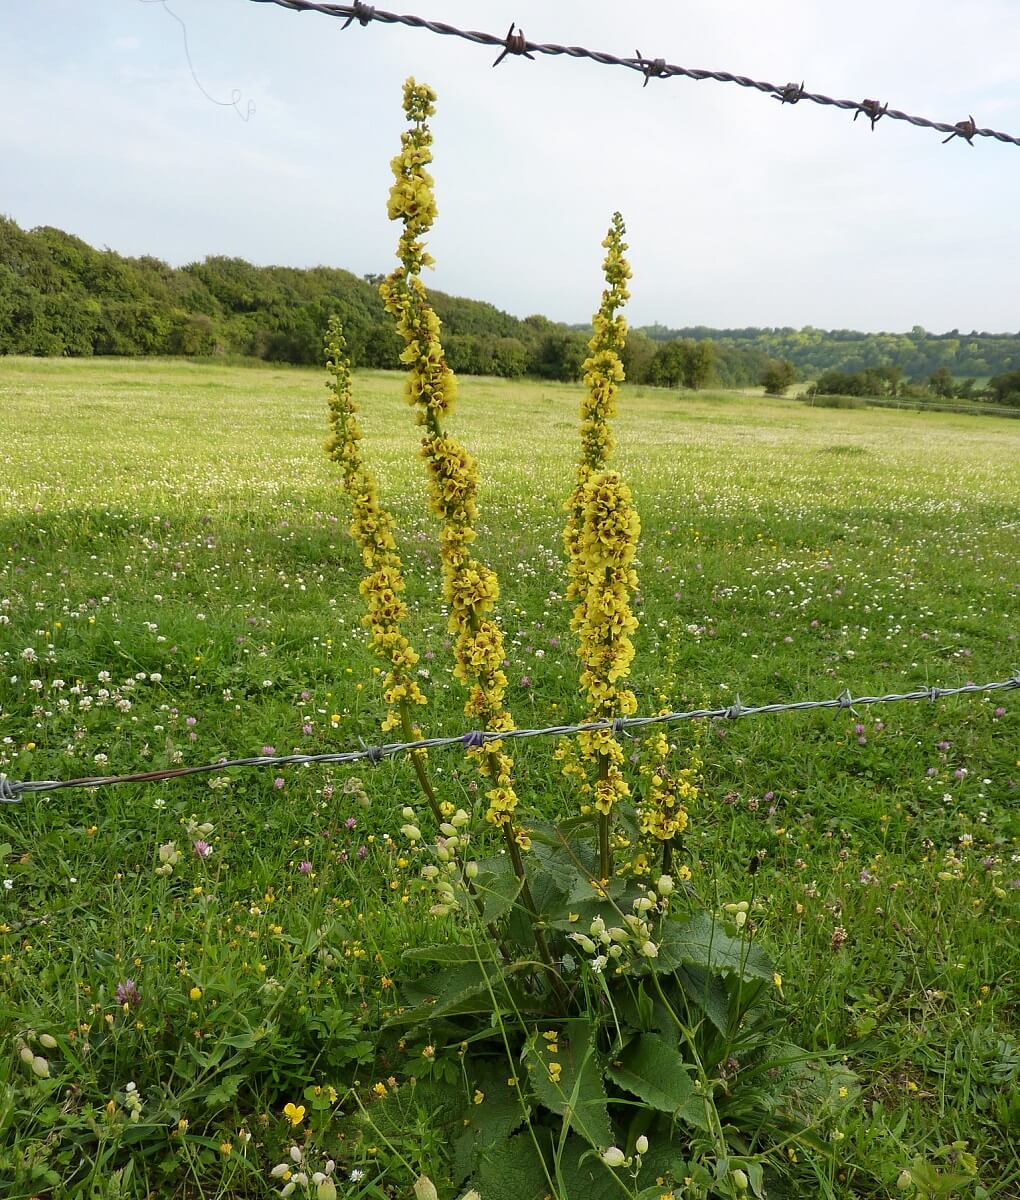 mullein on the fence line